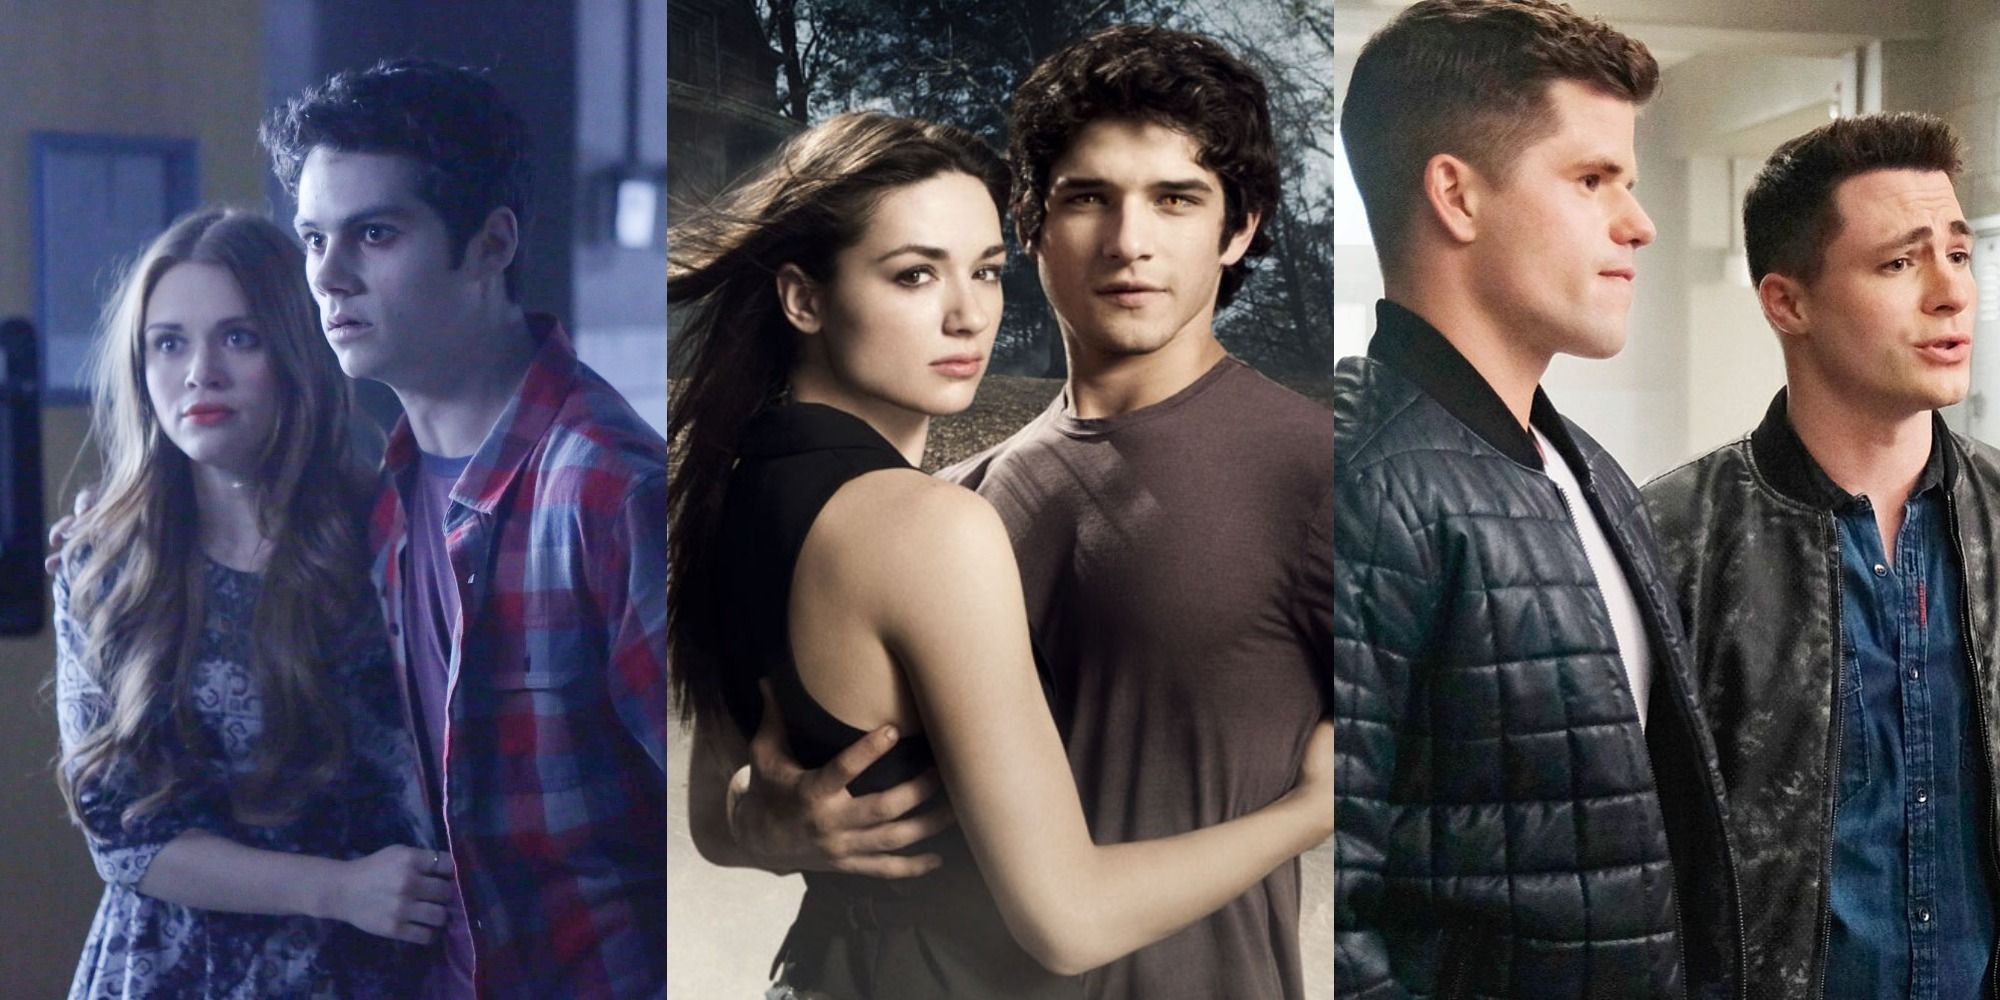 Teen Wolf Couples: Lydia and Stiles / Scott and Allison / Ethan and Jackson